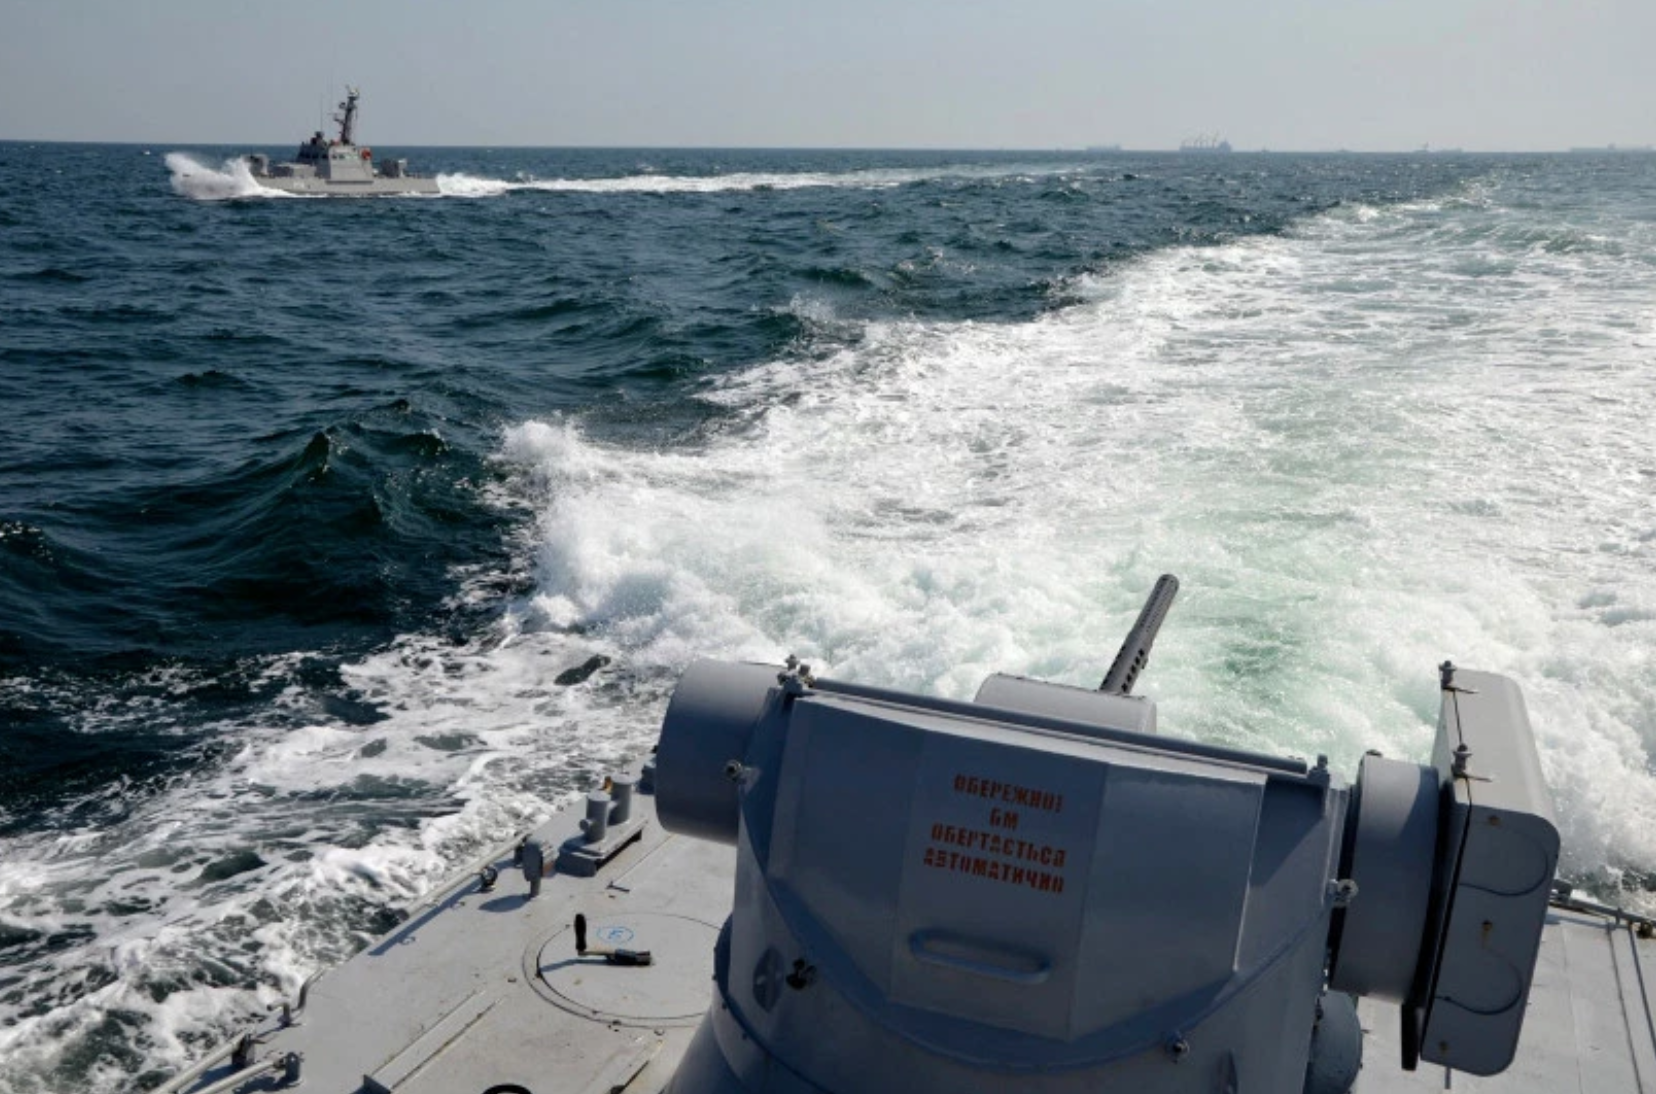 Putin will attempt to divert attention from Russia’s attack on Ukraine in Kerch Strait, Polyakov says